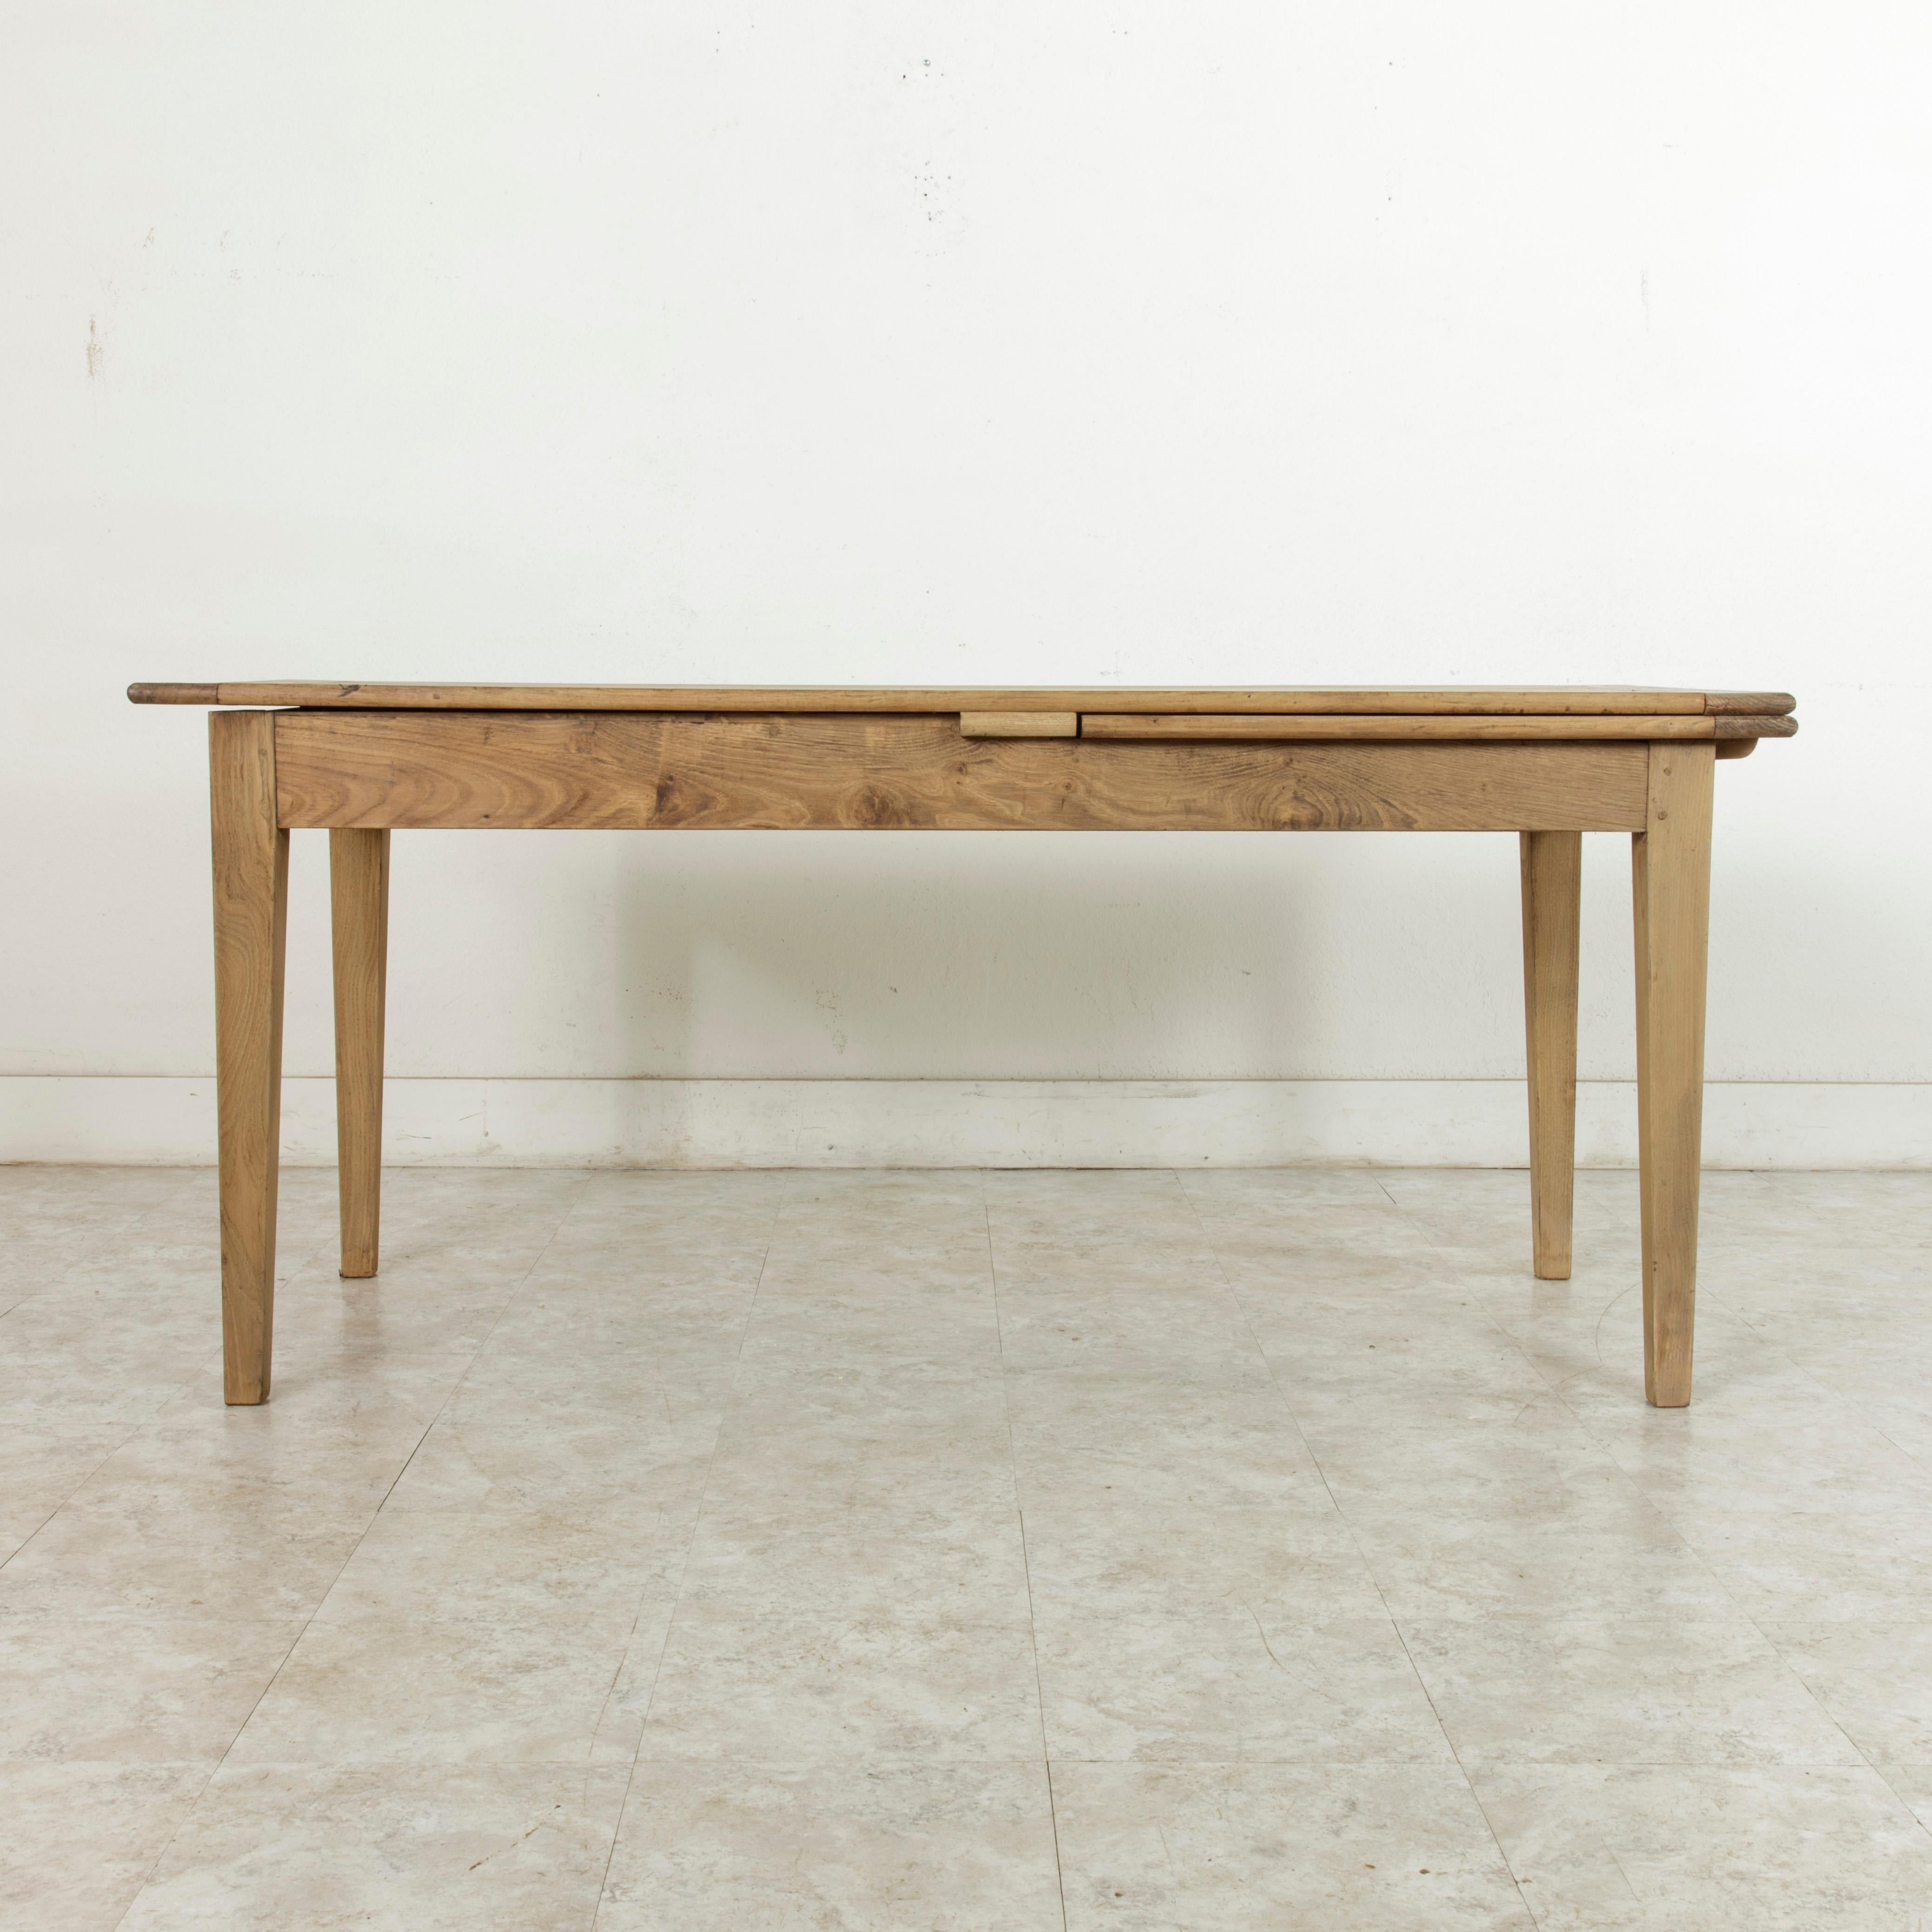 From the region of Le Perche in Normandy, France, this early 20th century oak farm table or dining table features a single draw leaf at one end that pulls out from underneath the tabletop. The pull-out leaf allows the table to accommodate up to